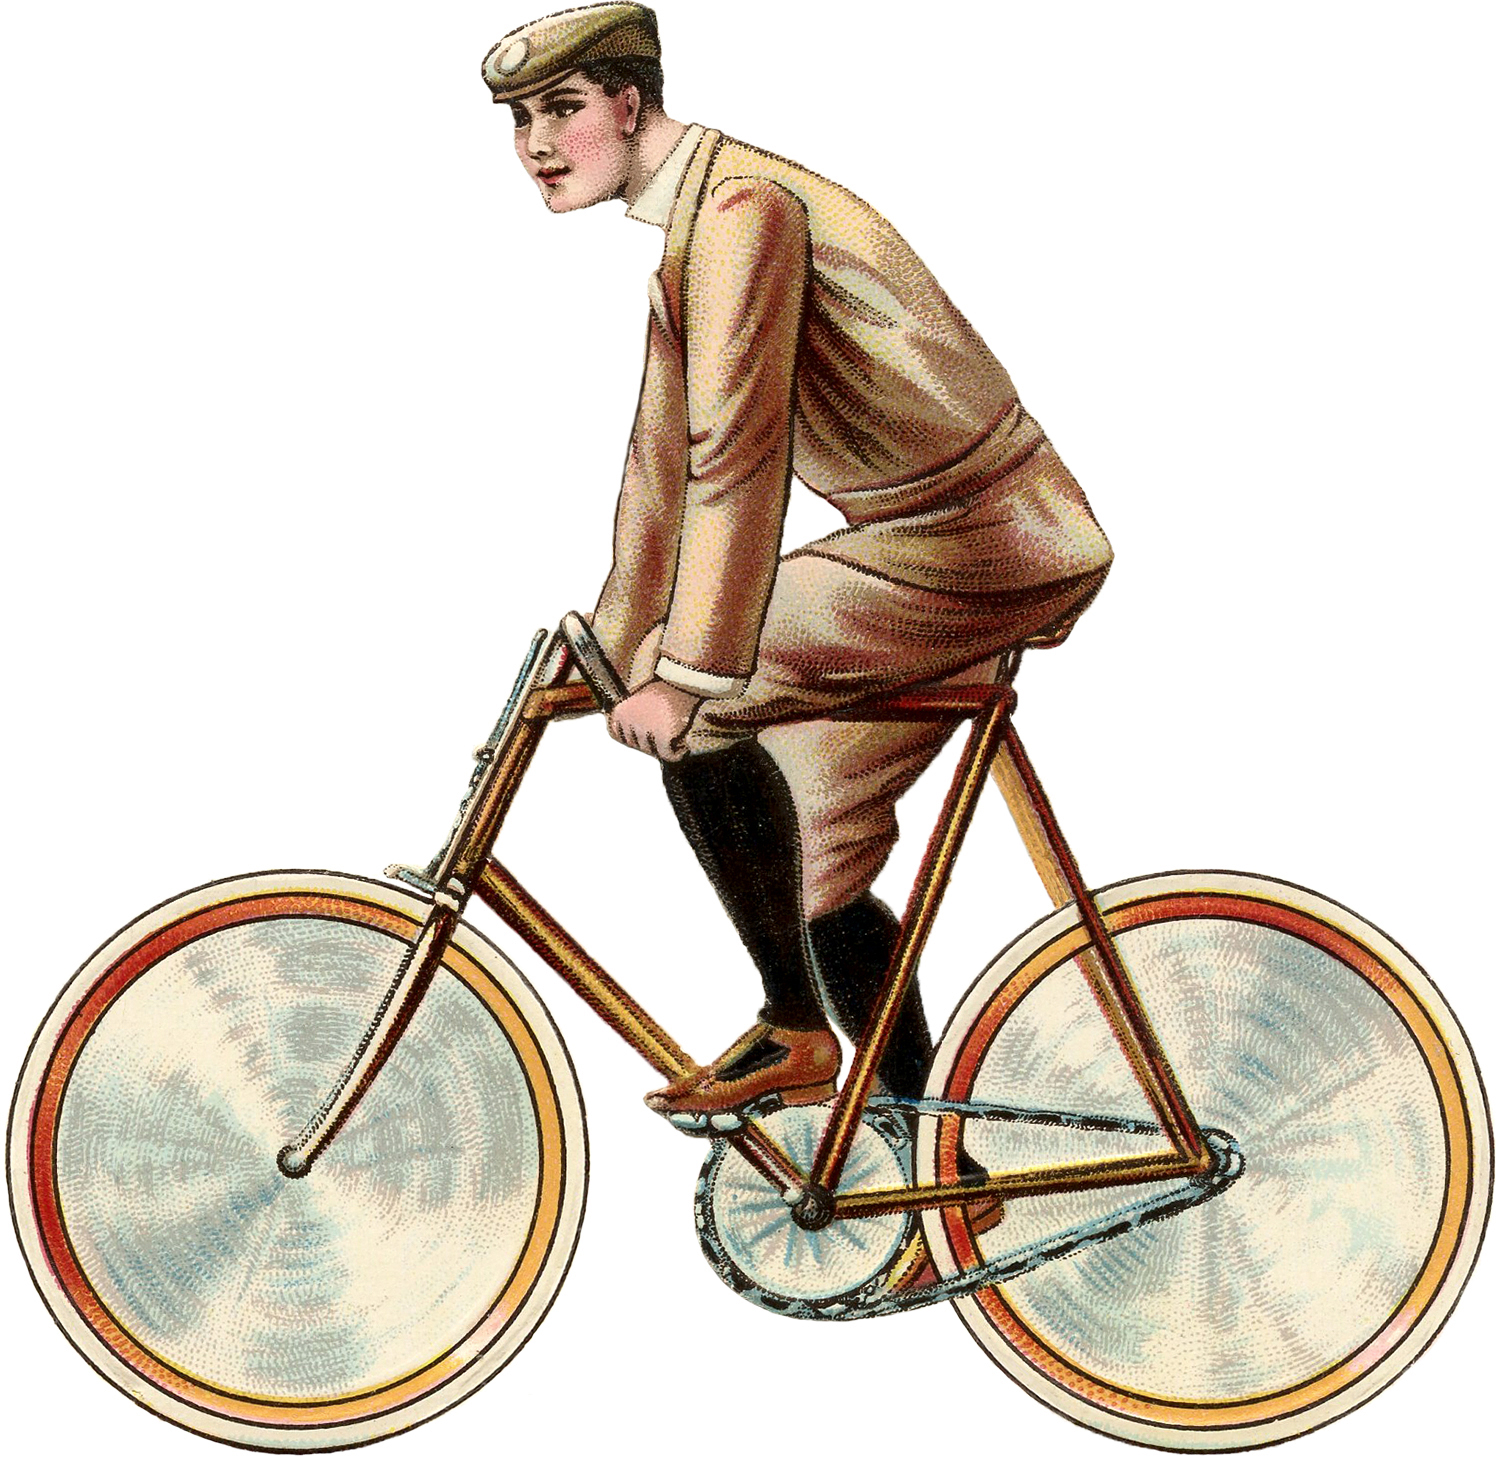 Vintage Bicycle Image - Young Man on Bike - The Graphics Fairy